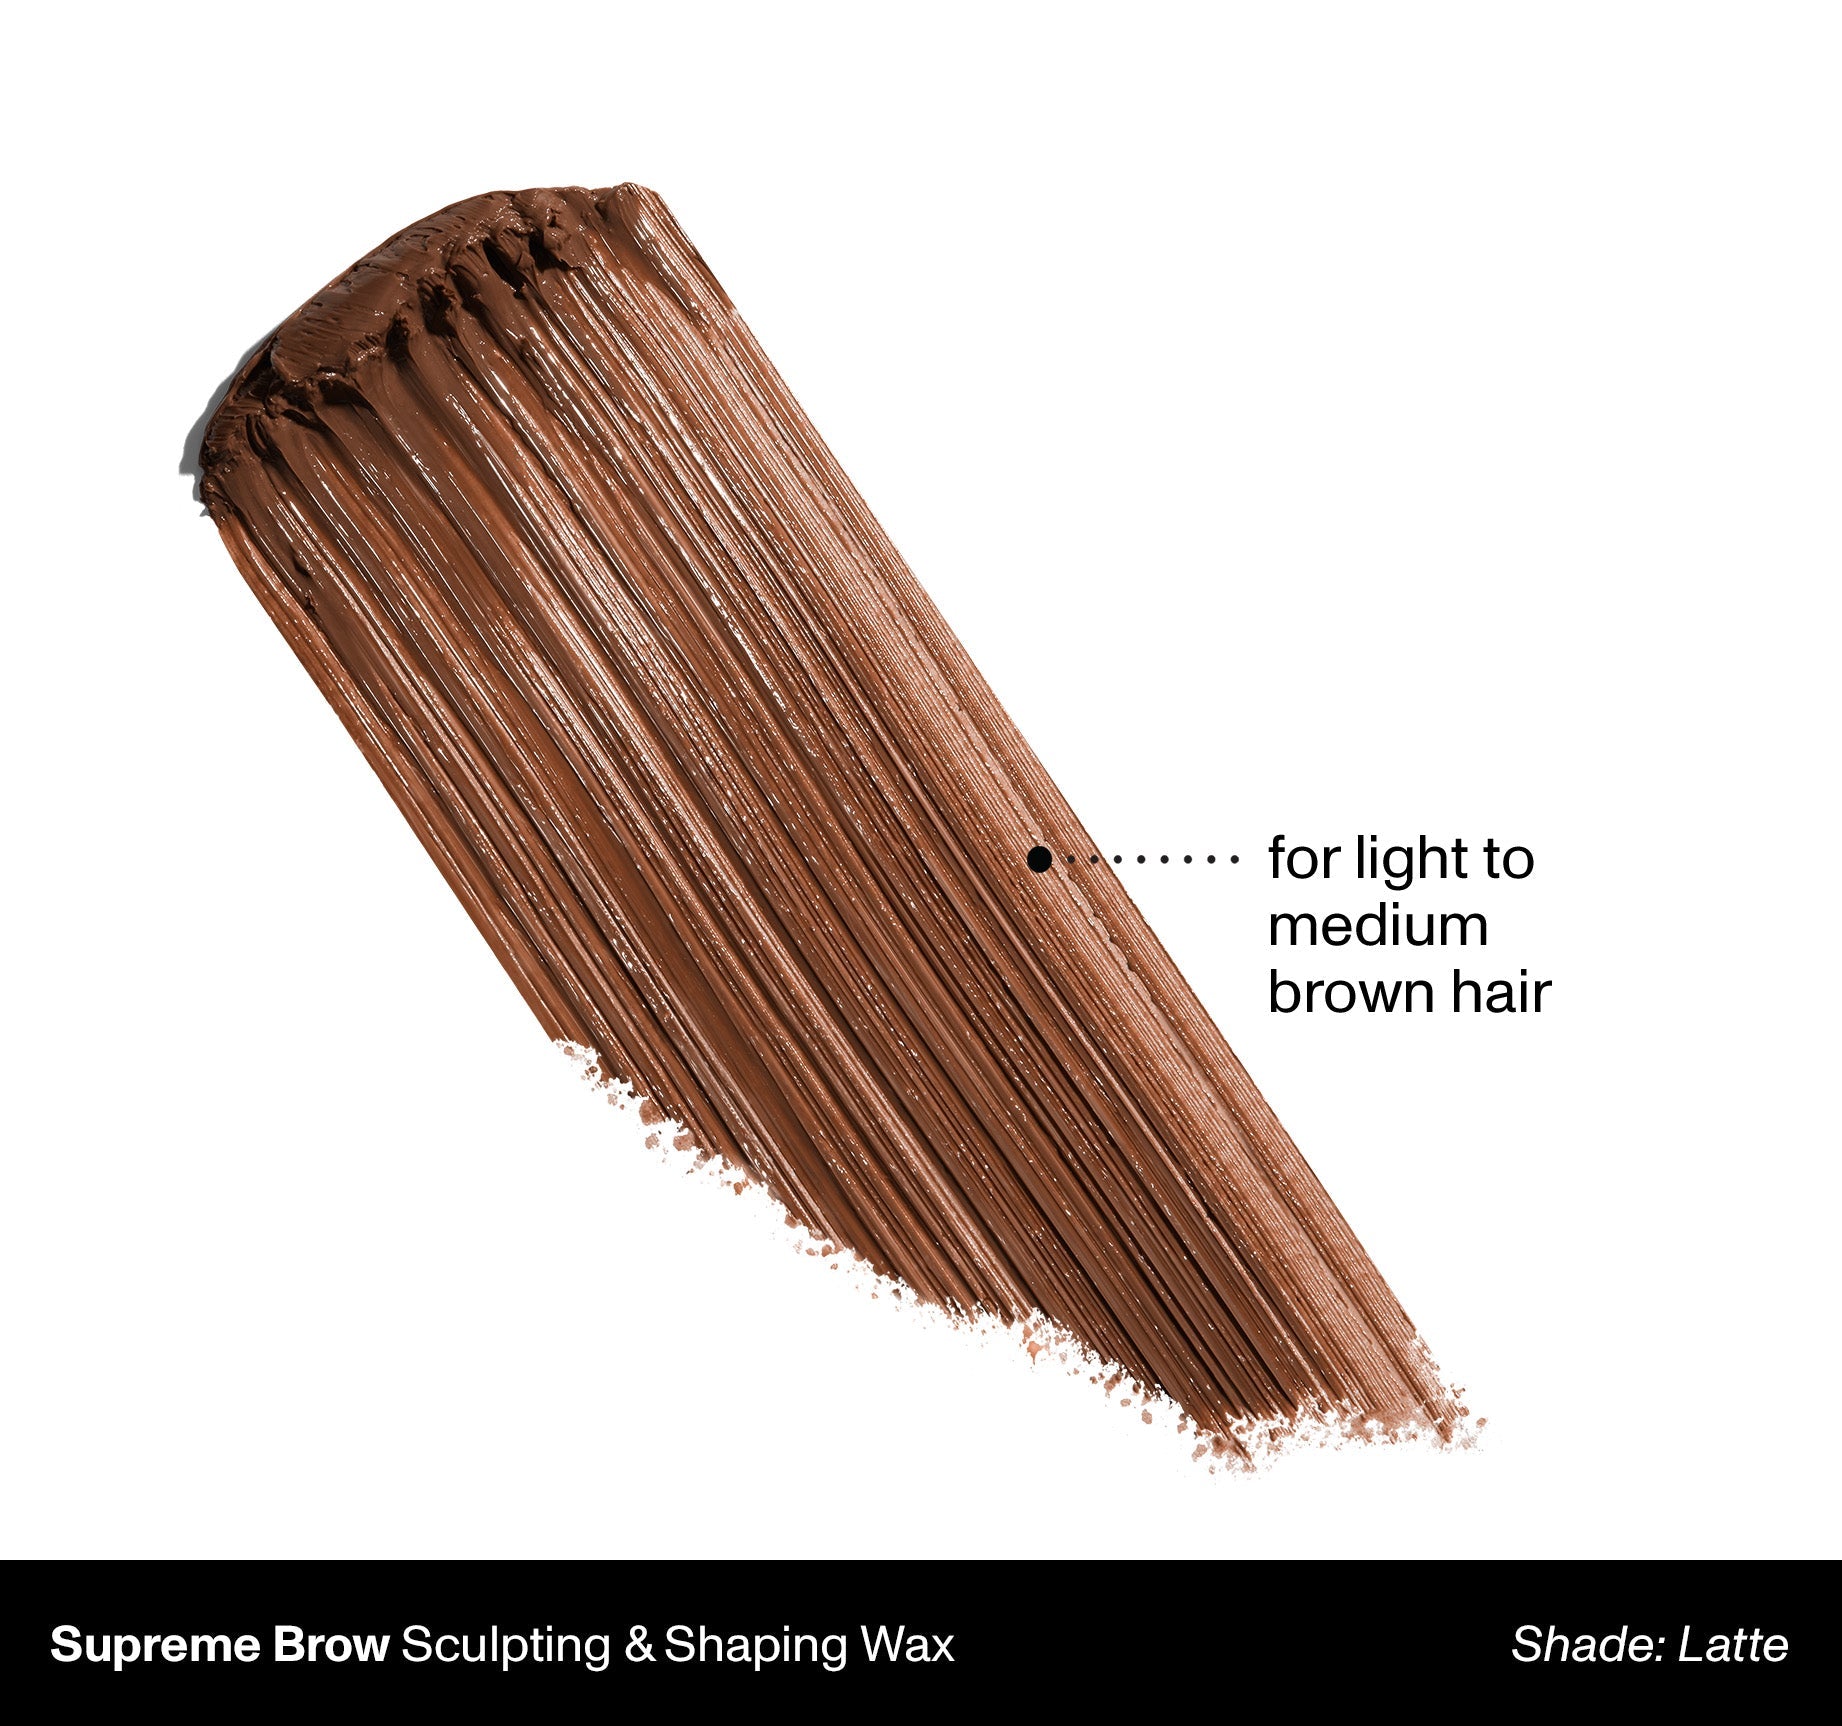 Supreme Brow Sculpting And Shaping Wax - Latte - Image 2